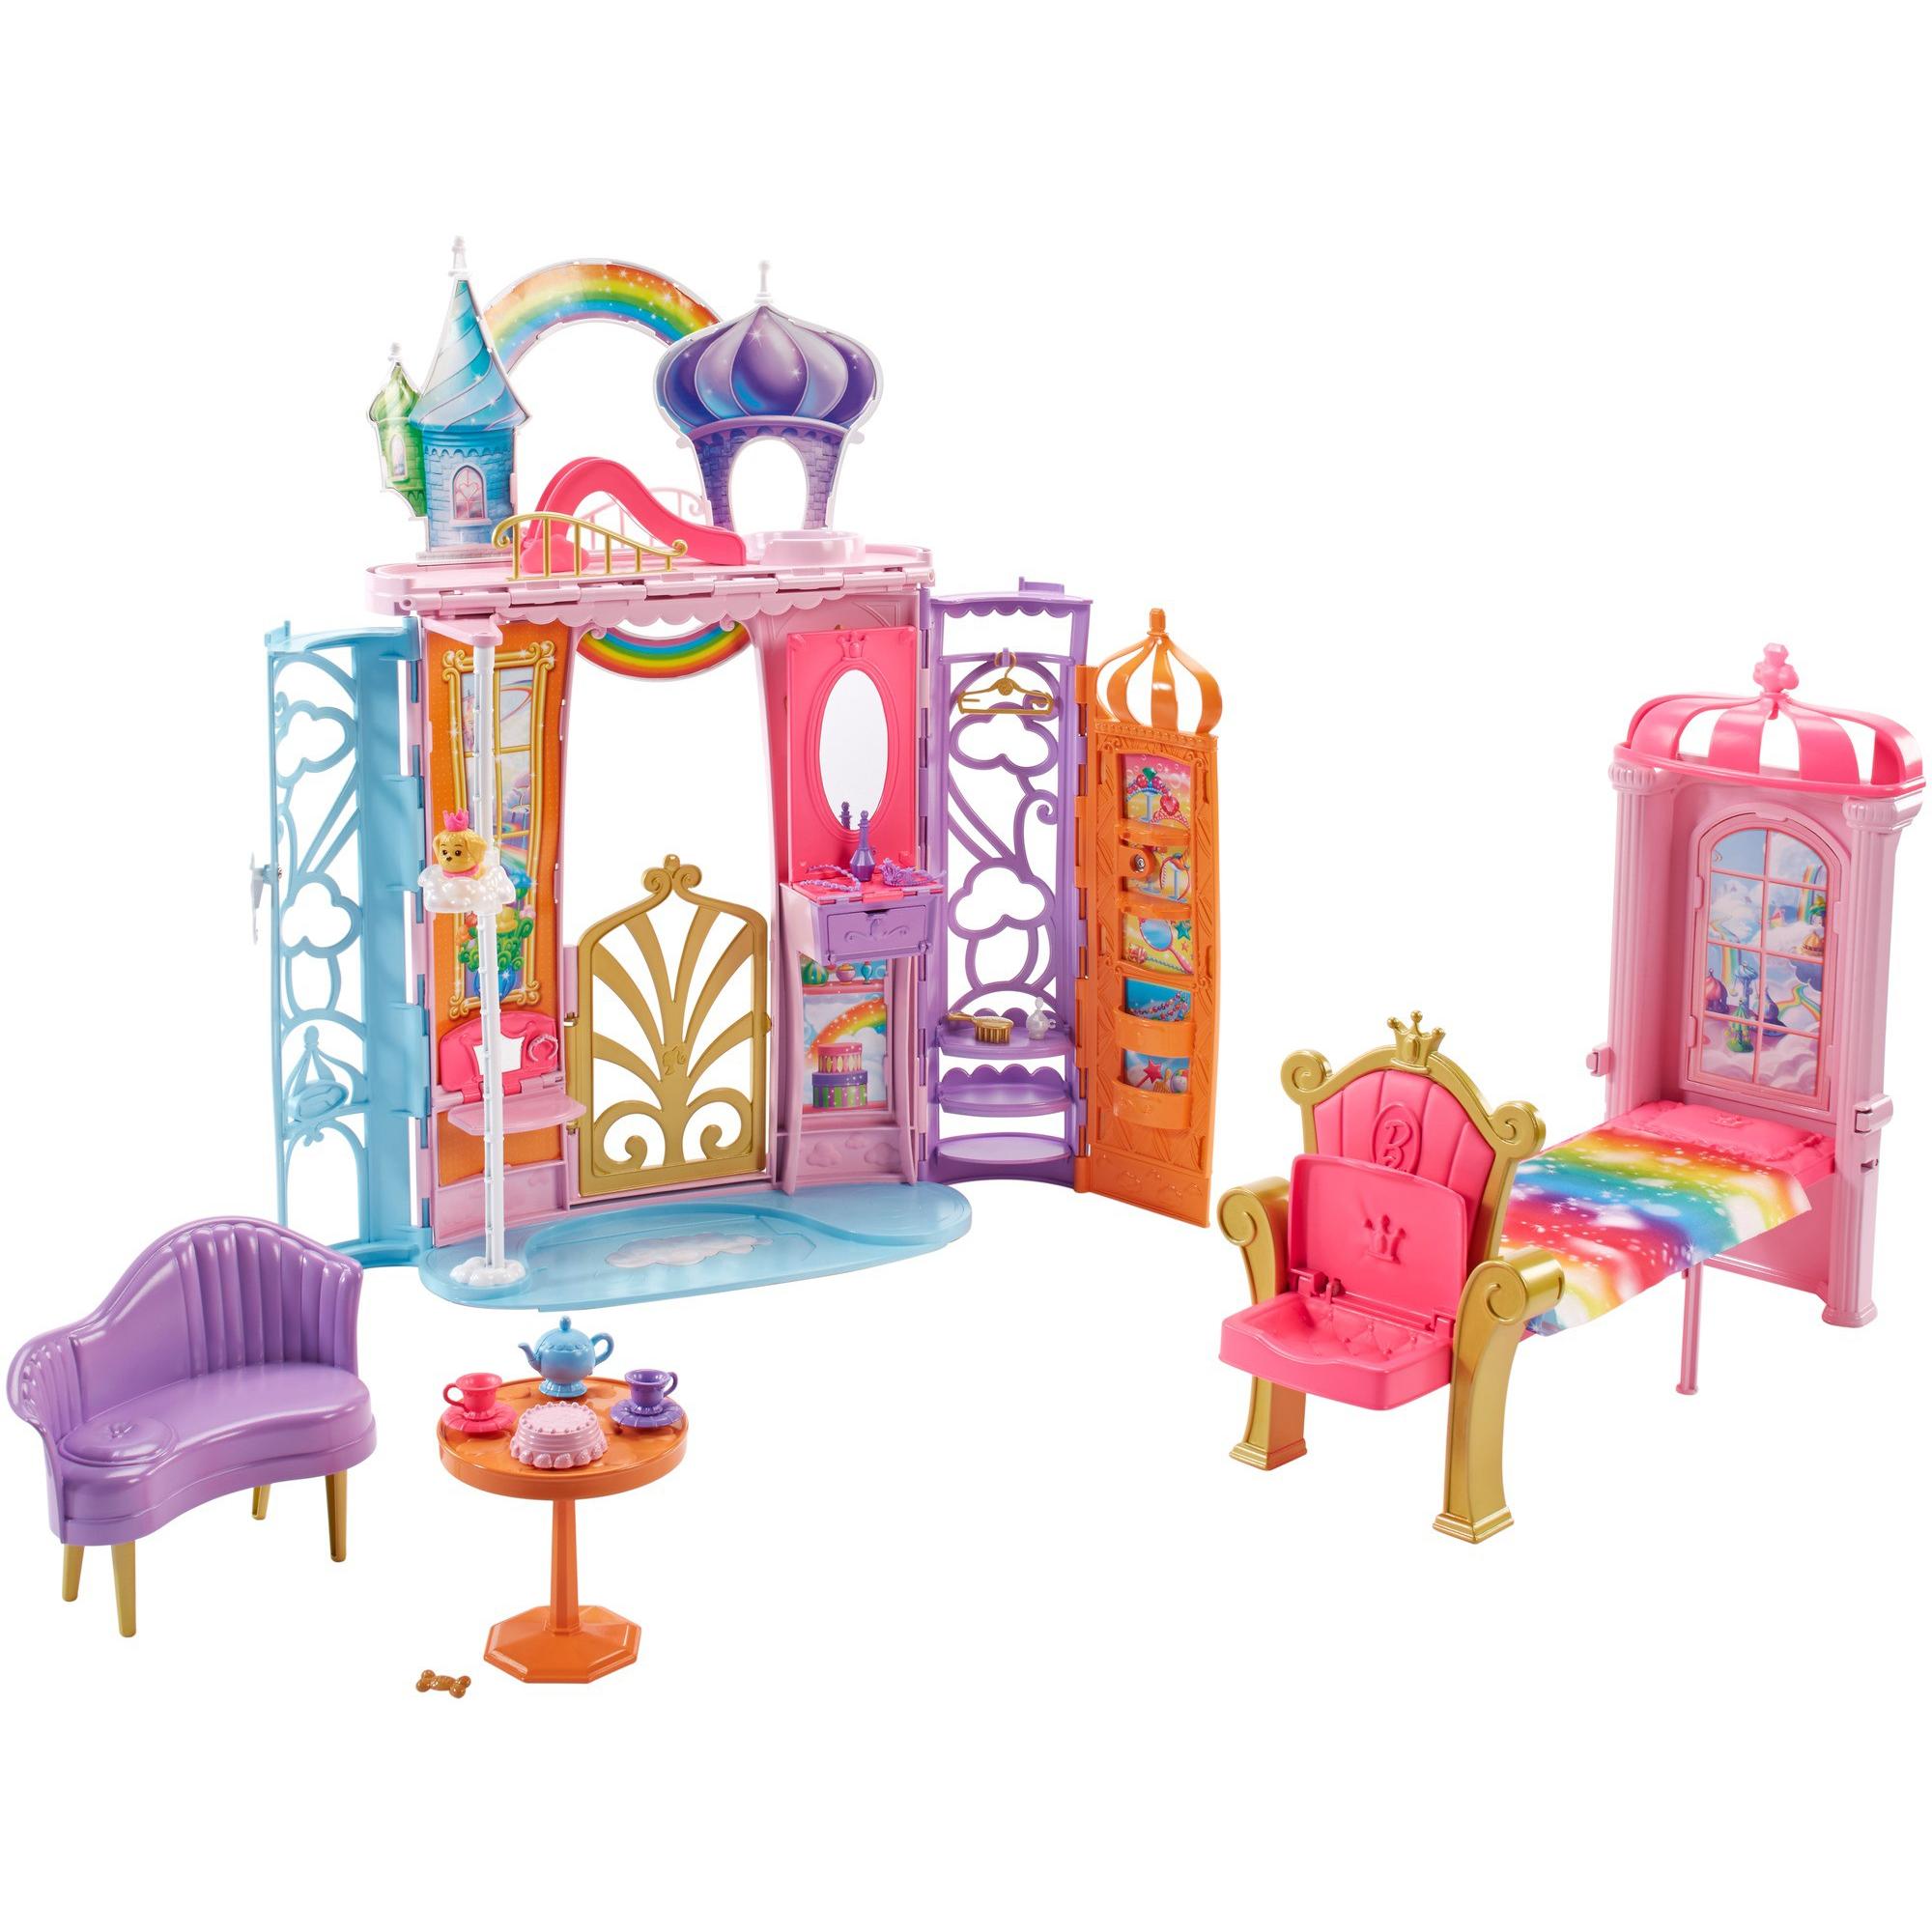 Barbie Dreamtopia Castle Portable Playset with Transforming Features - image 1 of 22